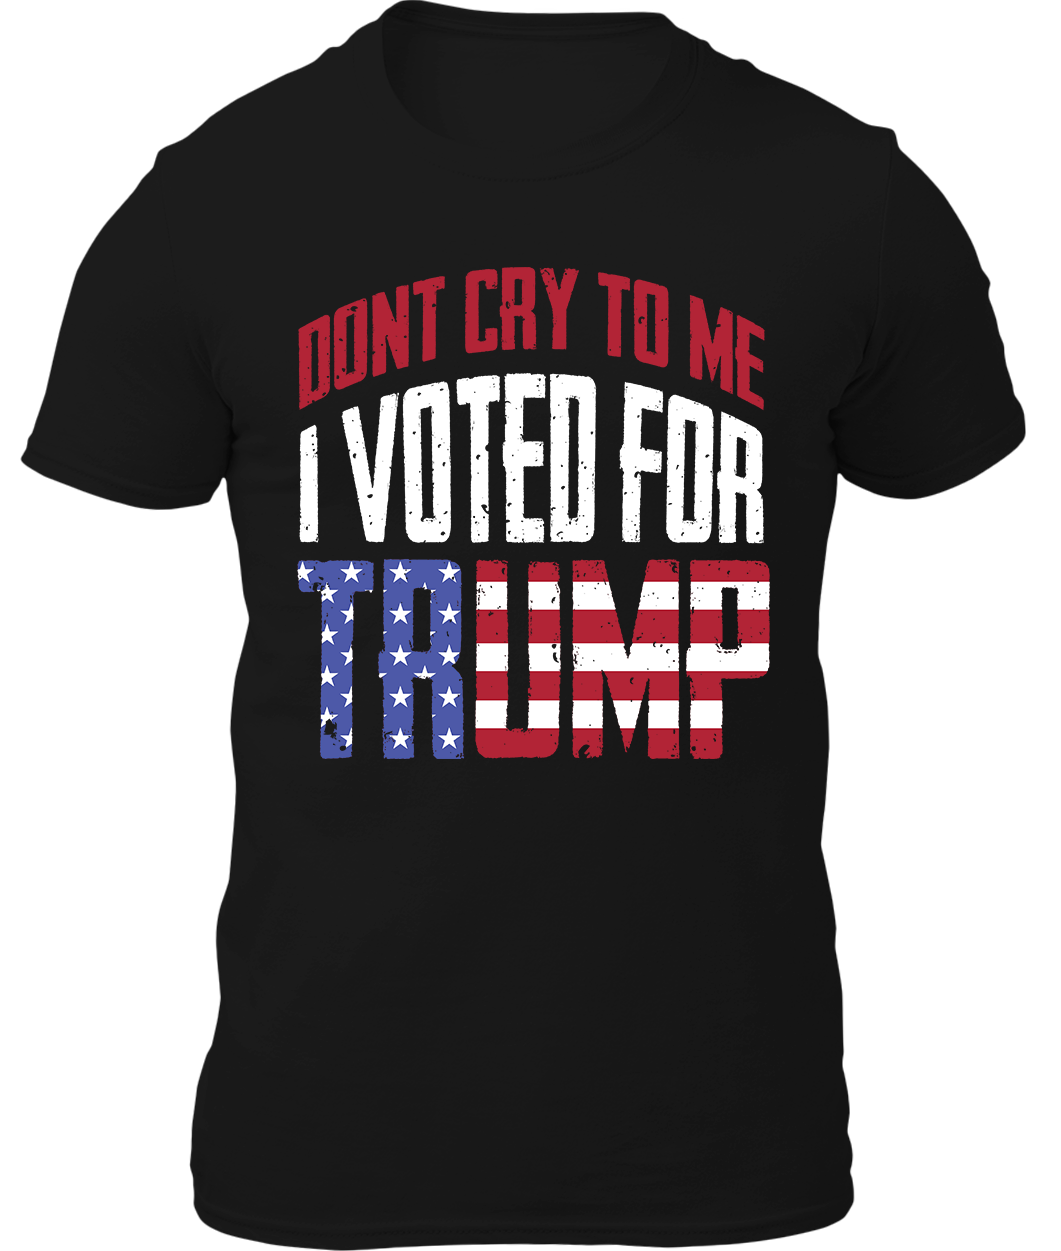 Don't Cry To Me I Voted For Trump Shirt